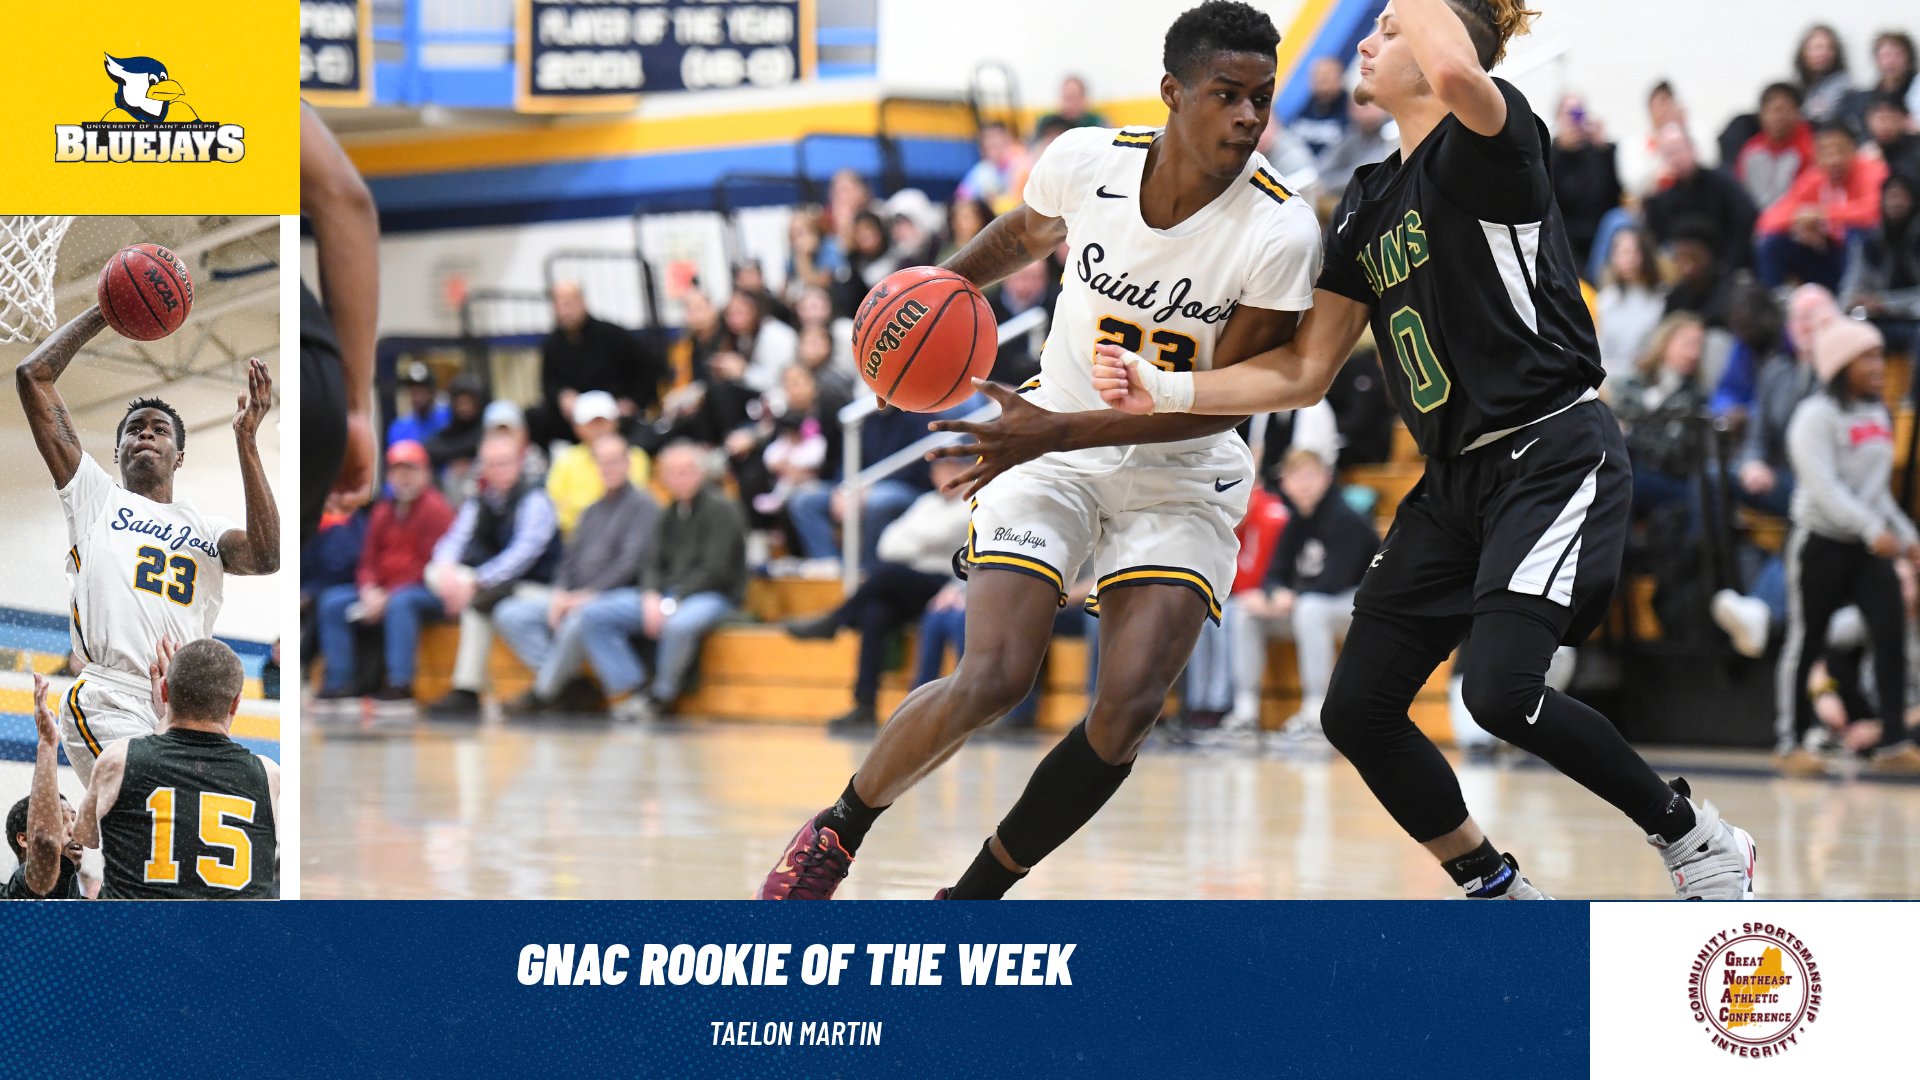 Martin Collects Second GNAC Rookie of the Week Award